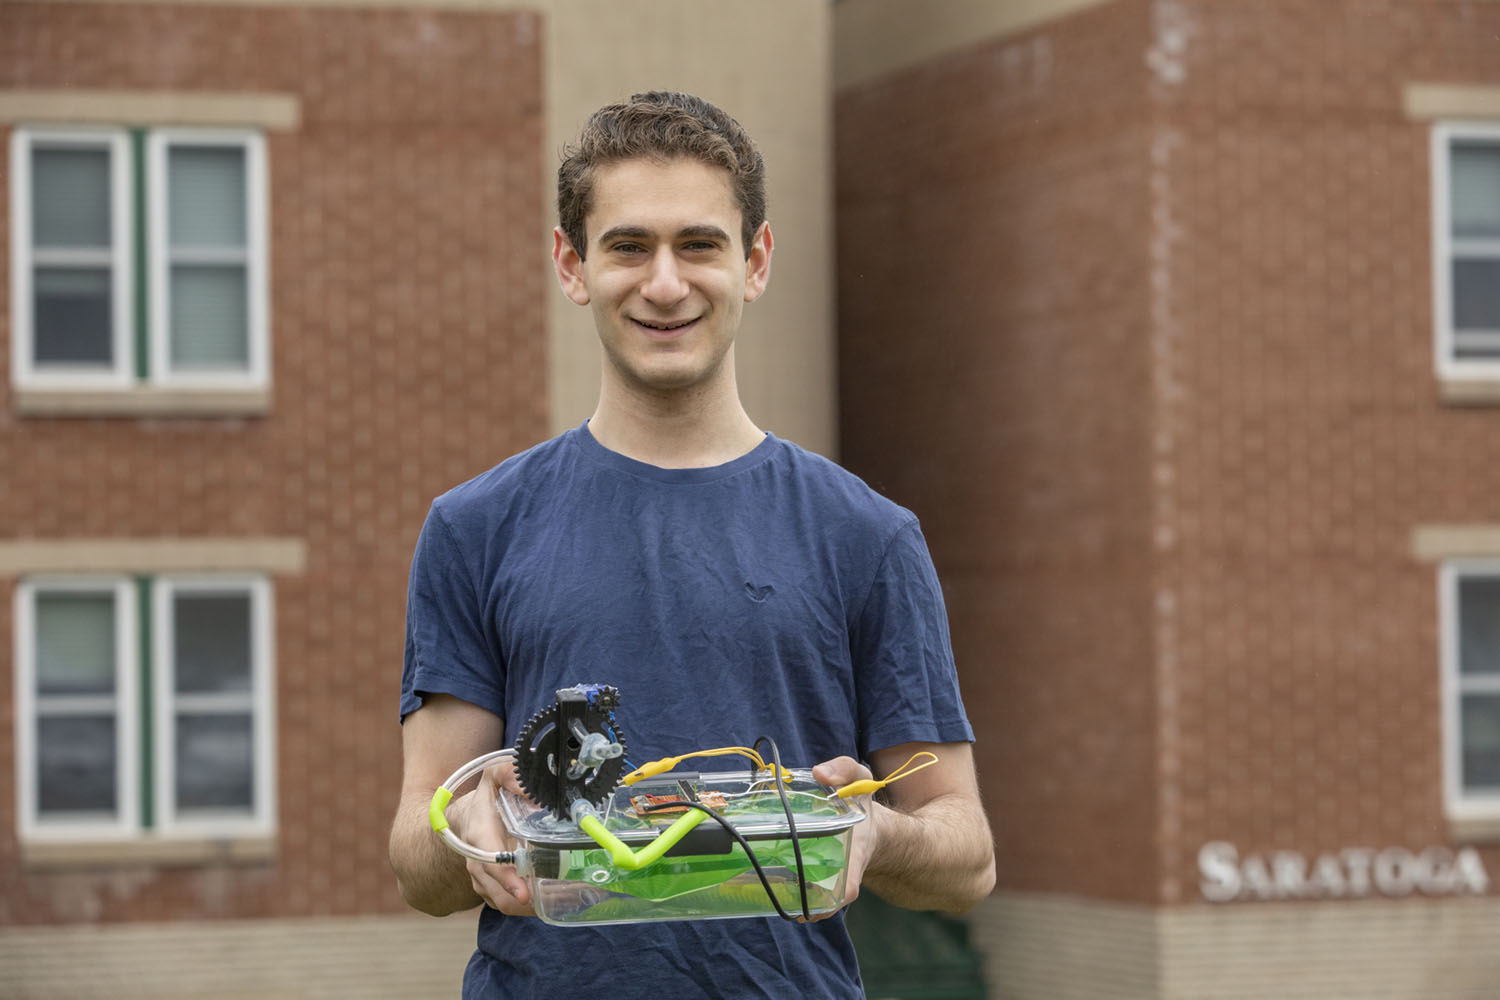 Newswise: Engineering student builds ventilator prototype in campus residence over weekend using Walmart parts